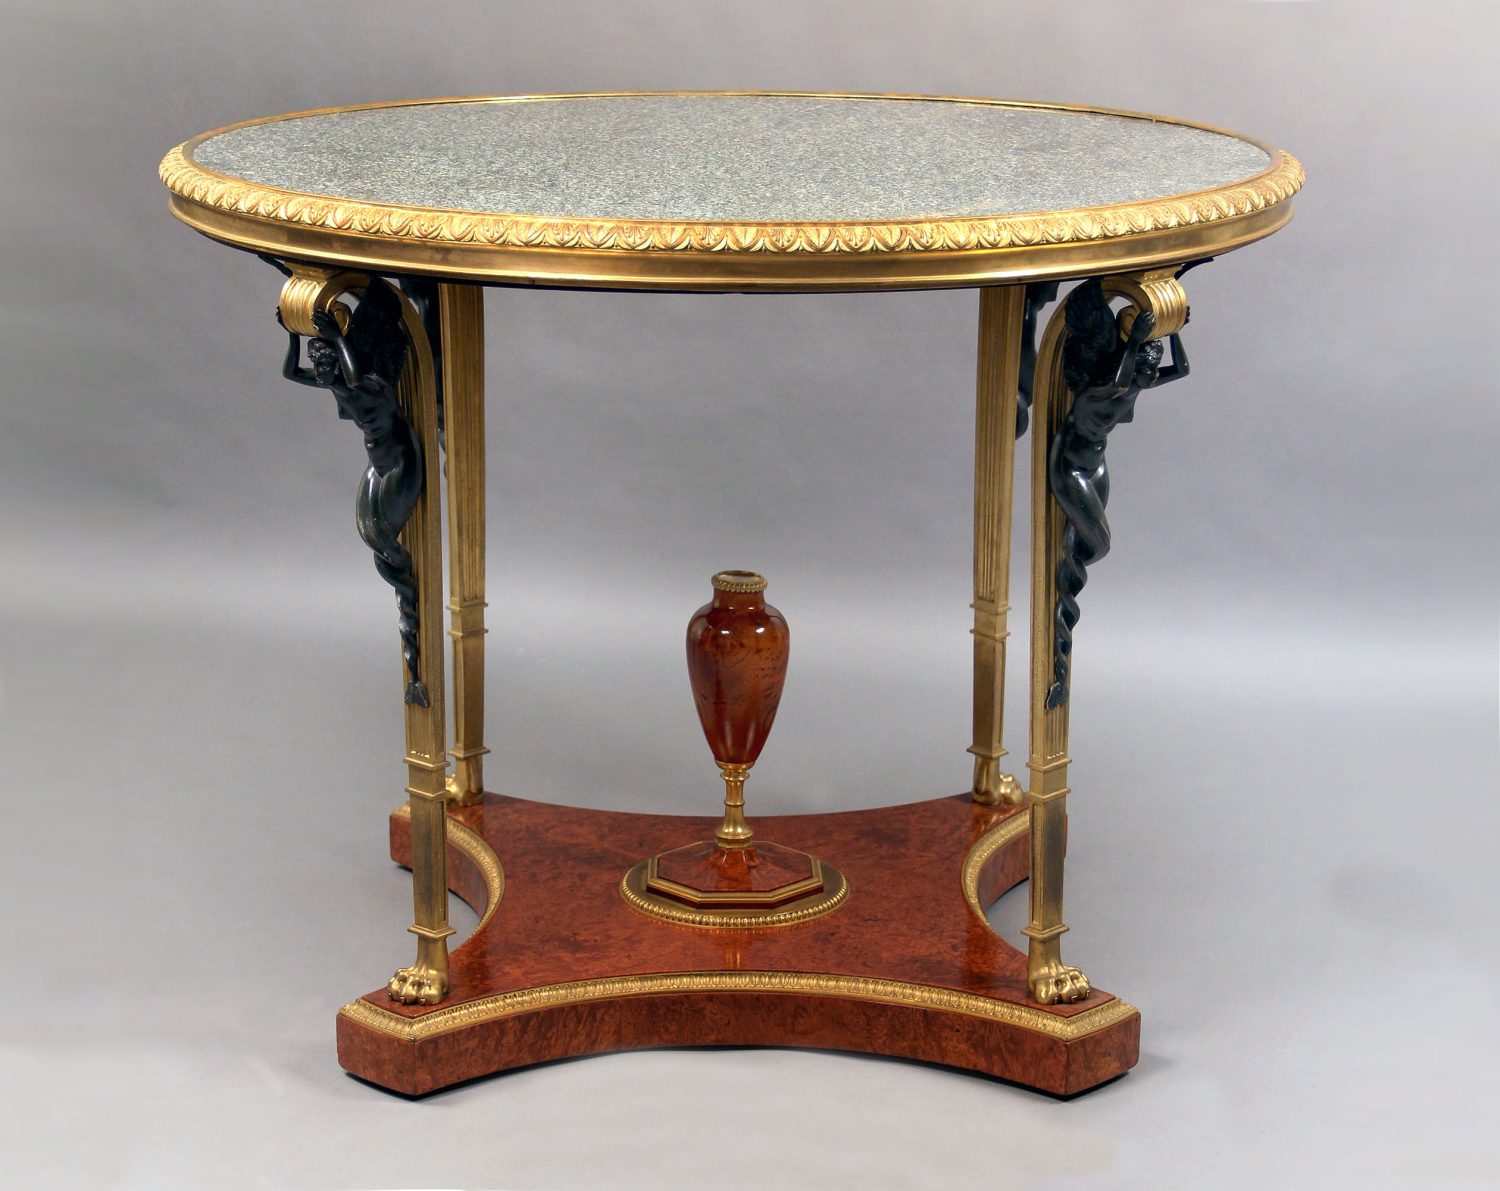 Gilt and painted bronze amboyna center table